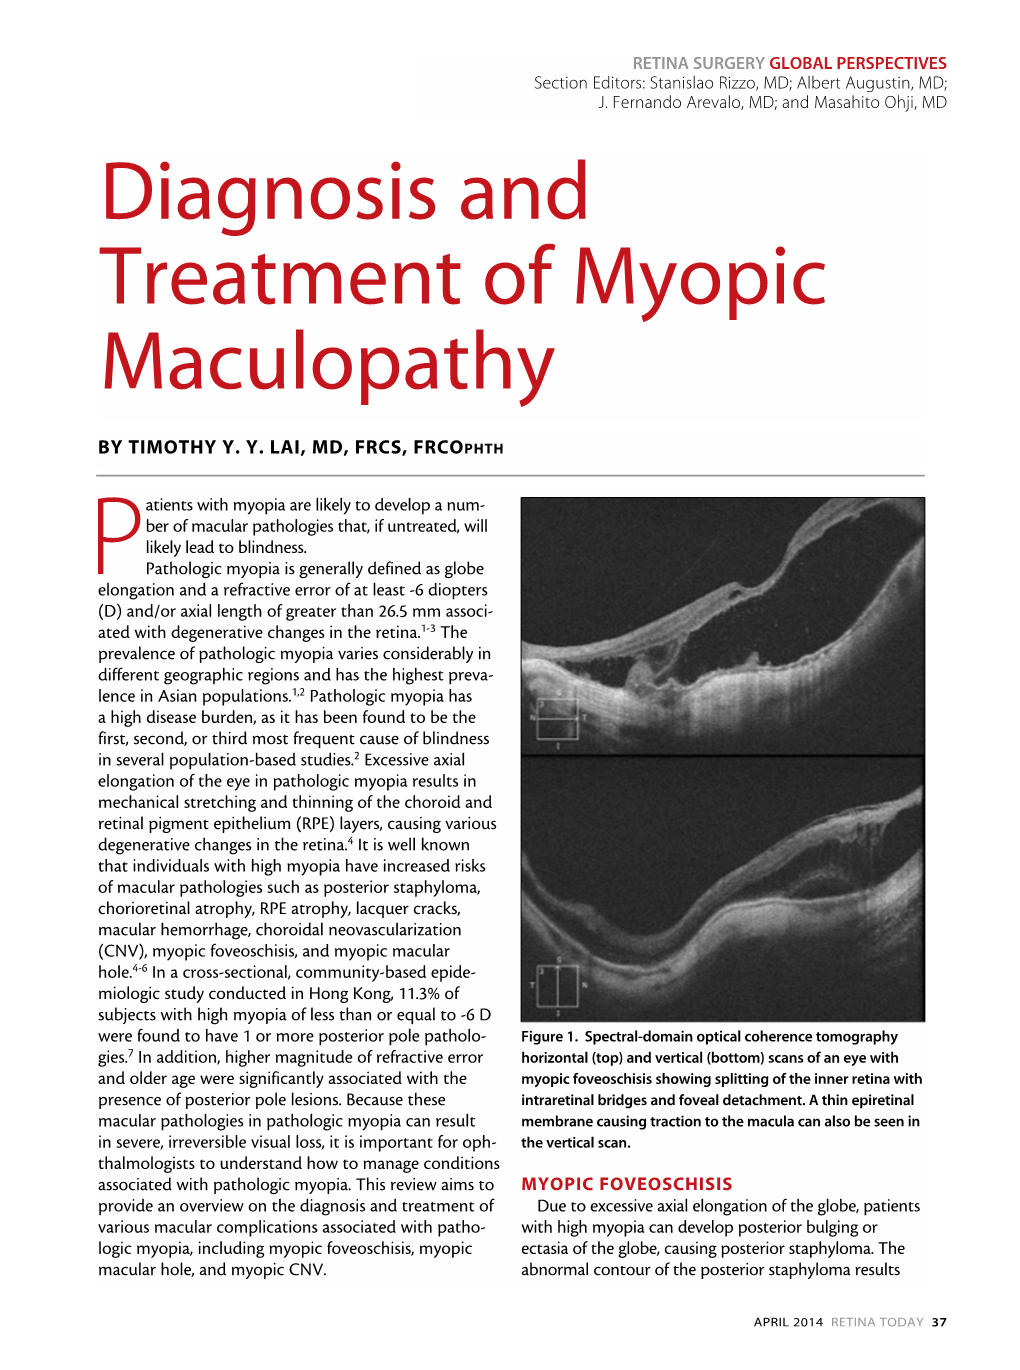 Diagnosis and Treatment of Myopic Maculopathy